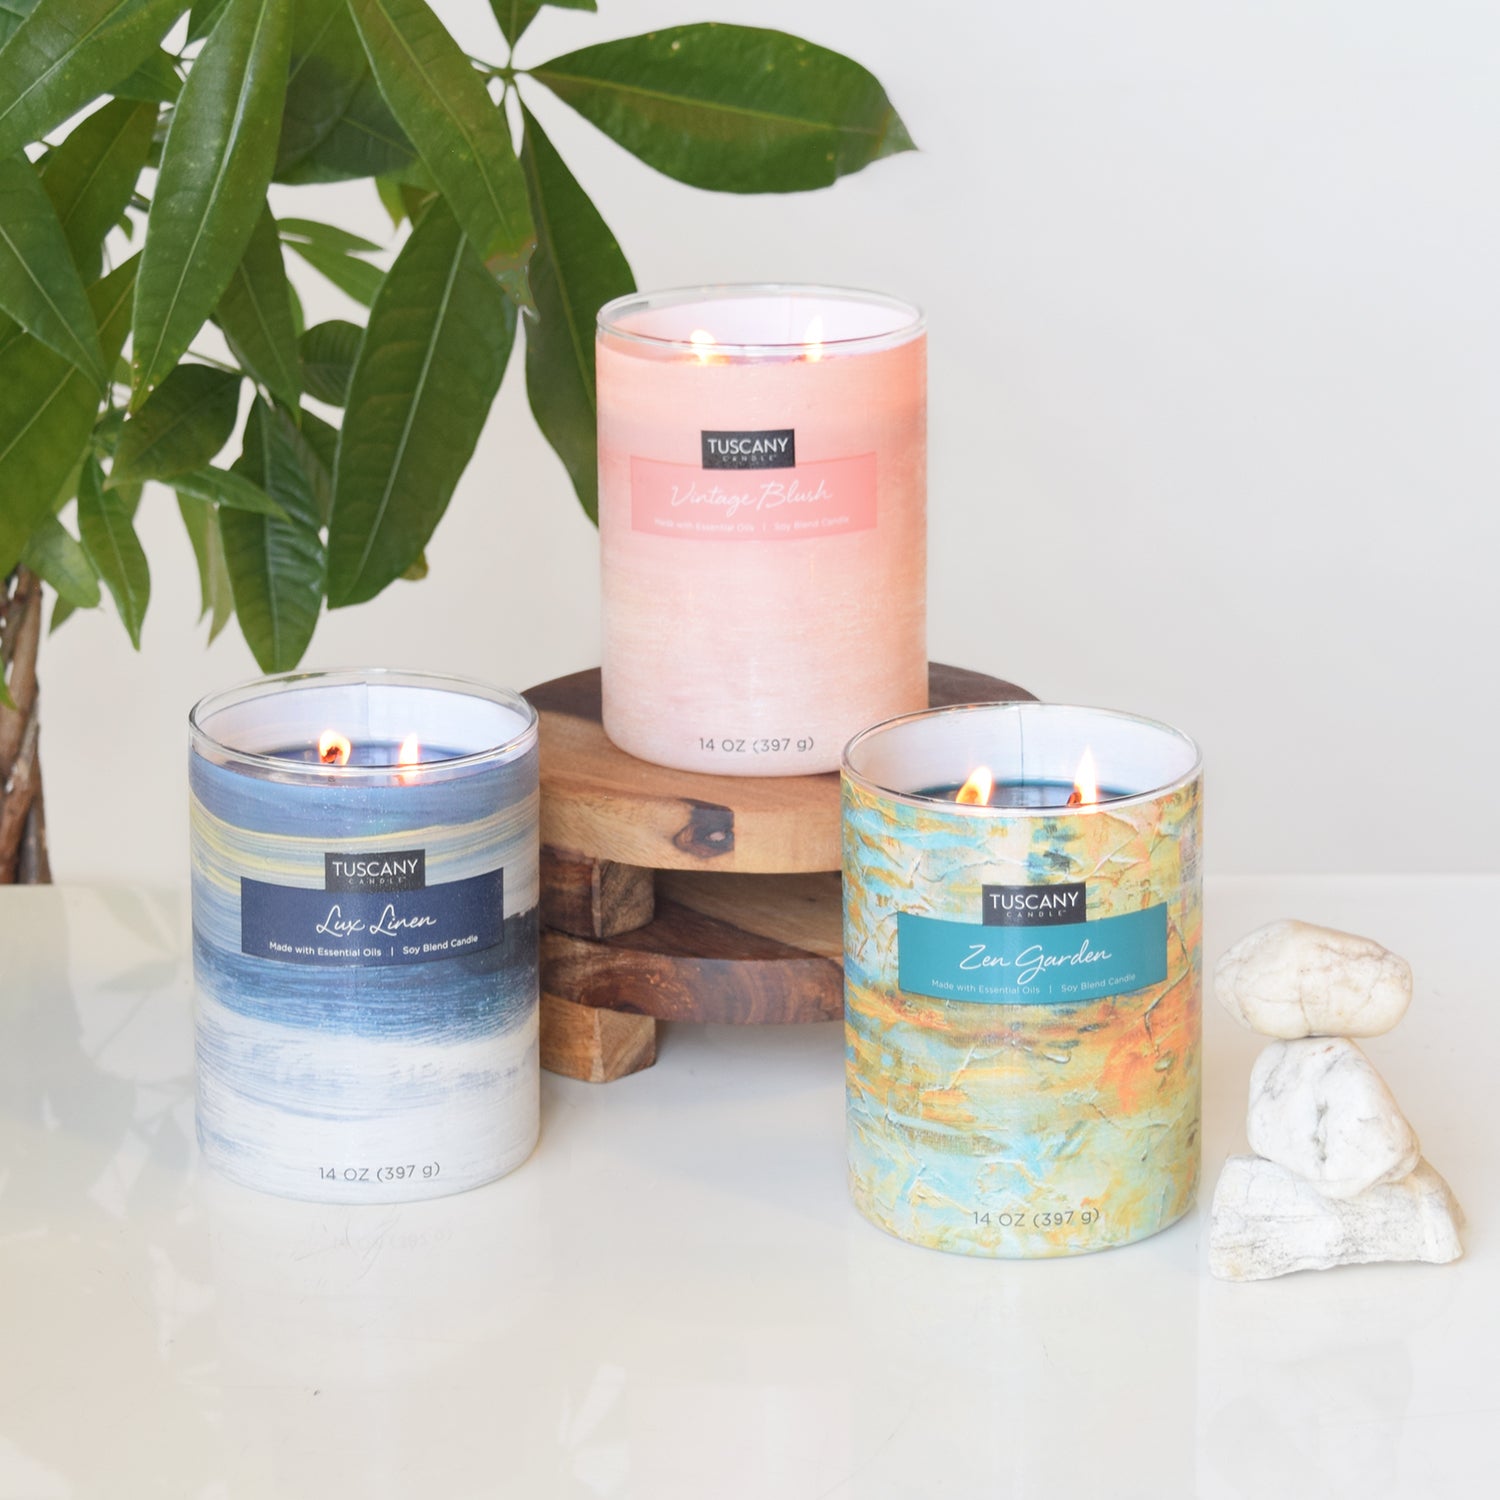 Three Zen Garden Scented Jar Candles (14 oz) from the Tuscany Candle Home Décor Collection on a table next to a plant emitting a soothing FRAGRANCE.